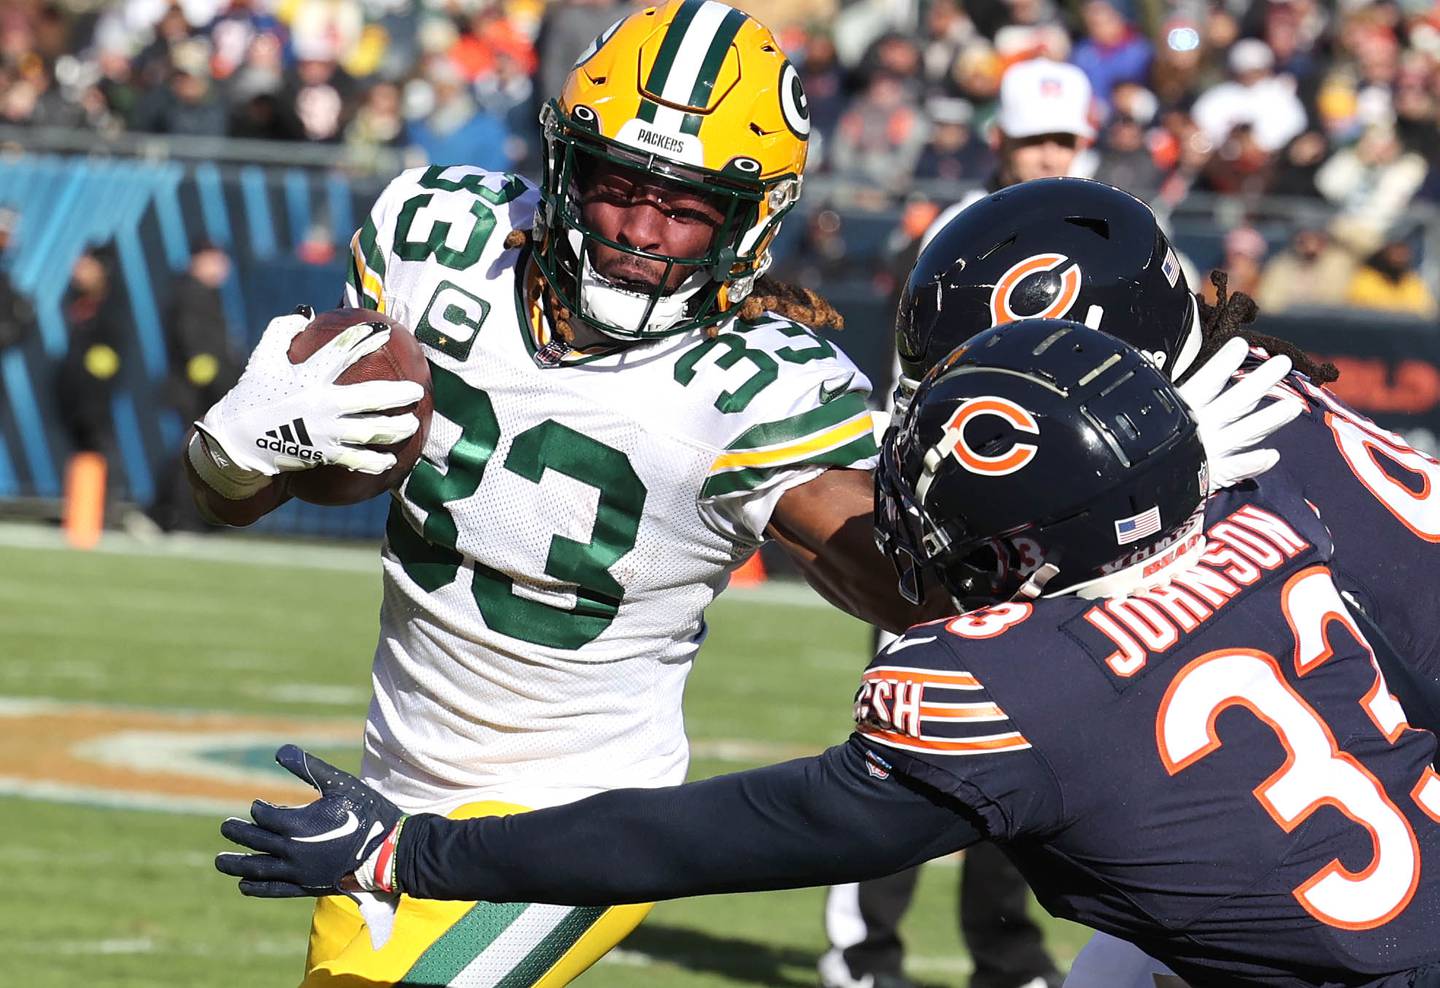 Green Bay Packers running back Aaron Jones tries to get by Chicago Bears cornerback Jaylon Johnson during their game Sunday, Dec. 4, 2022, at Soldier Field in Chicago.